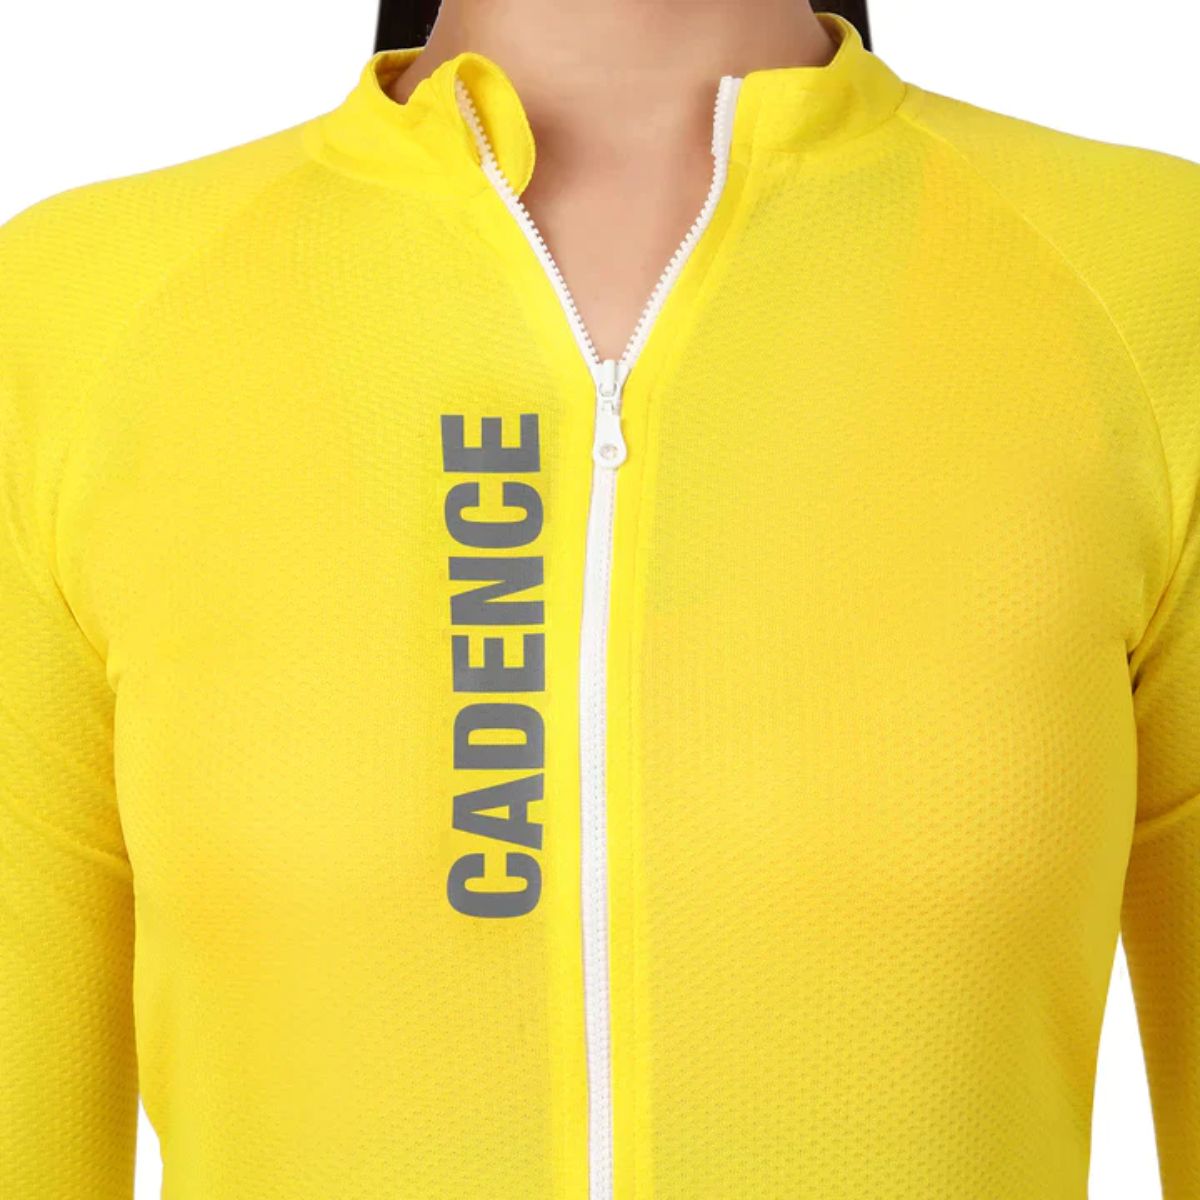 Womens BeVisible Cycling Jersey - Full Sleeves - Bright Yellow 2